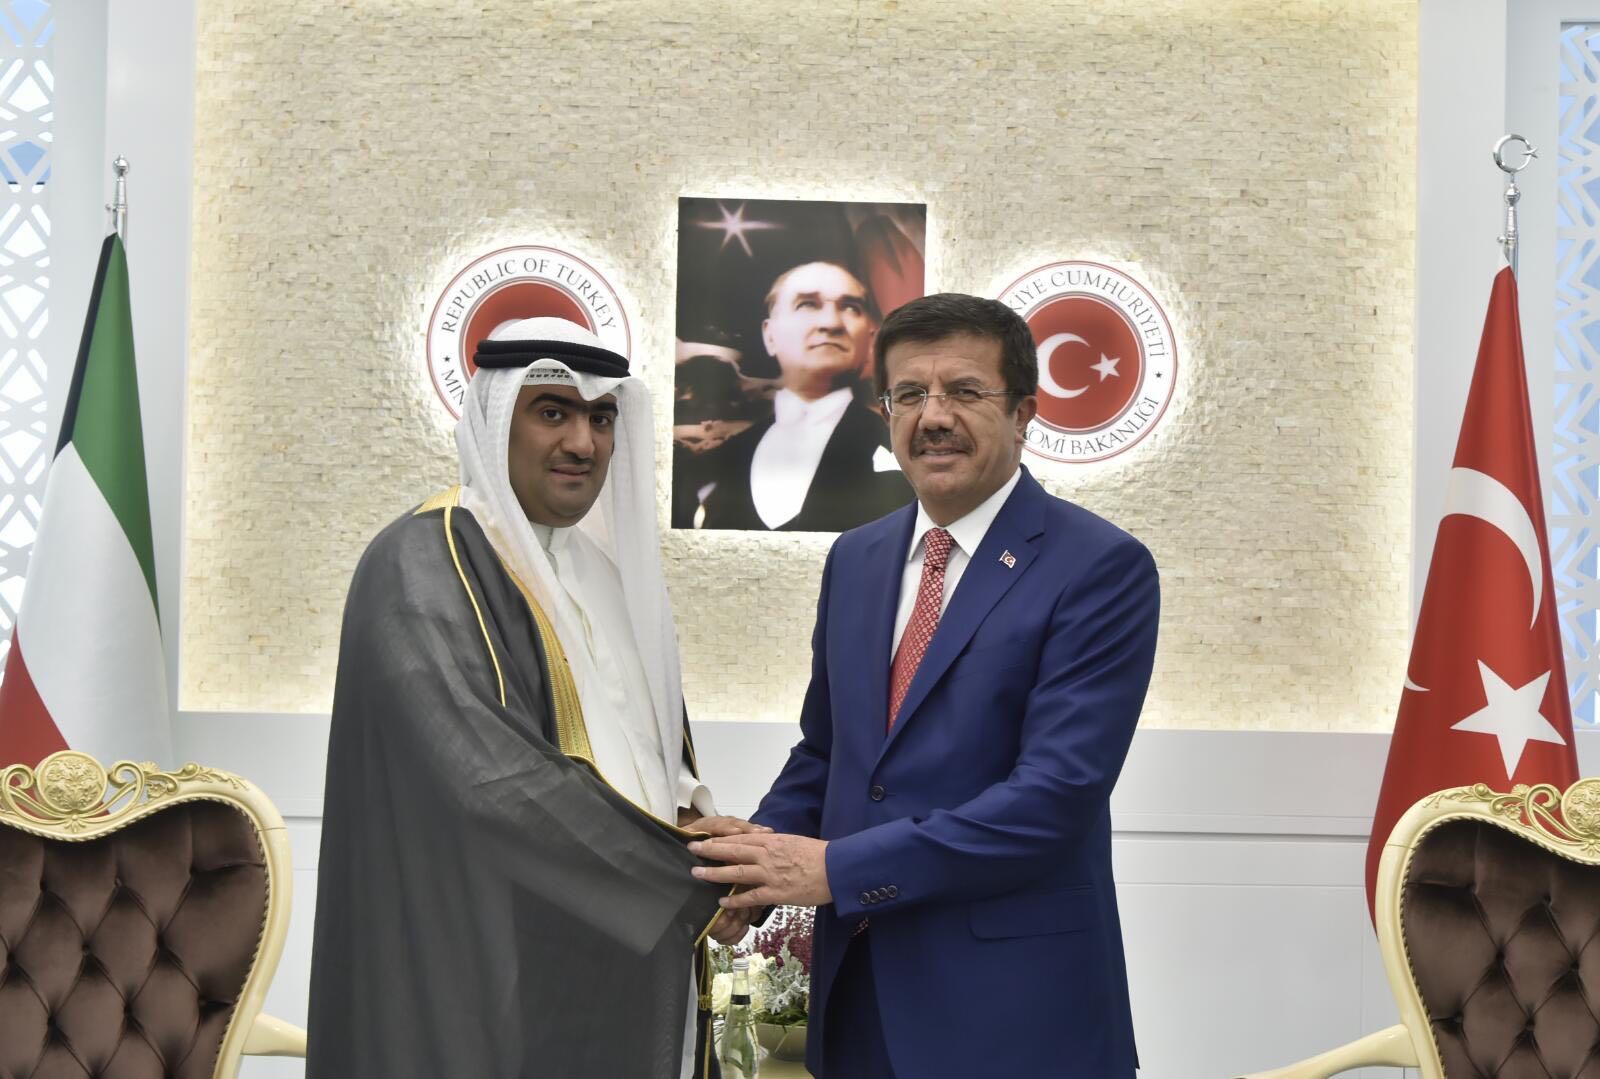 Kuwaiti Minister of Commerce and Industry as well as Acting Minister of State for Youth Affairs Khaled Al-Roudhan with Turkish counterpart Nihat Zeybekci